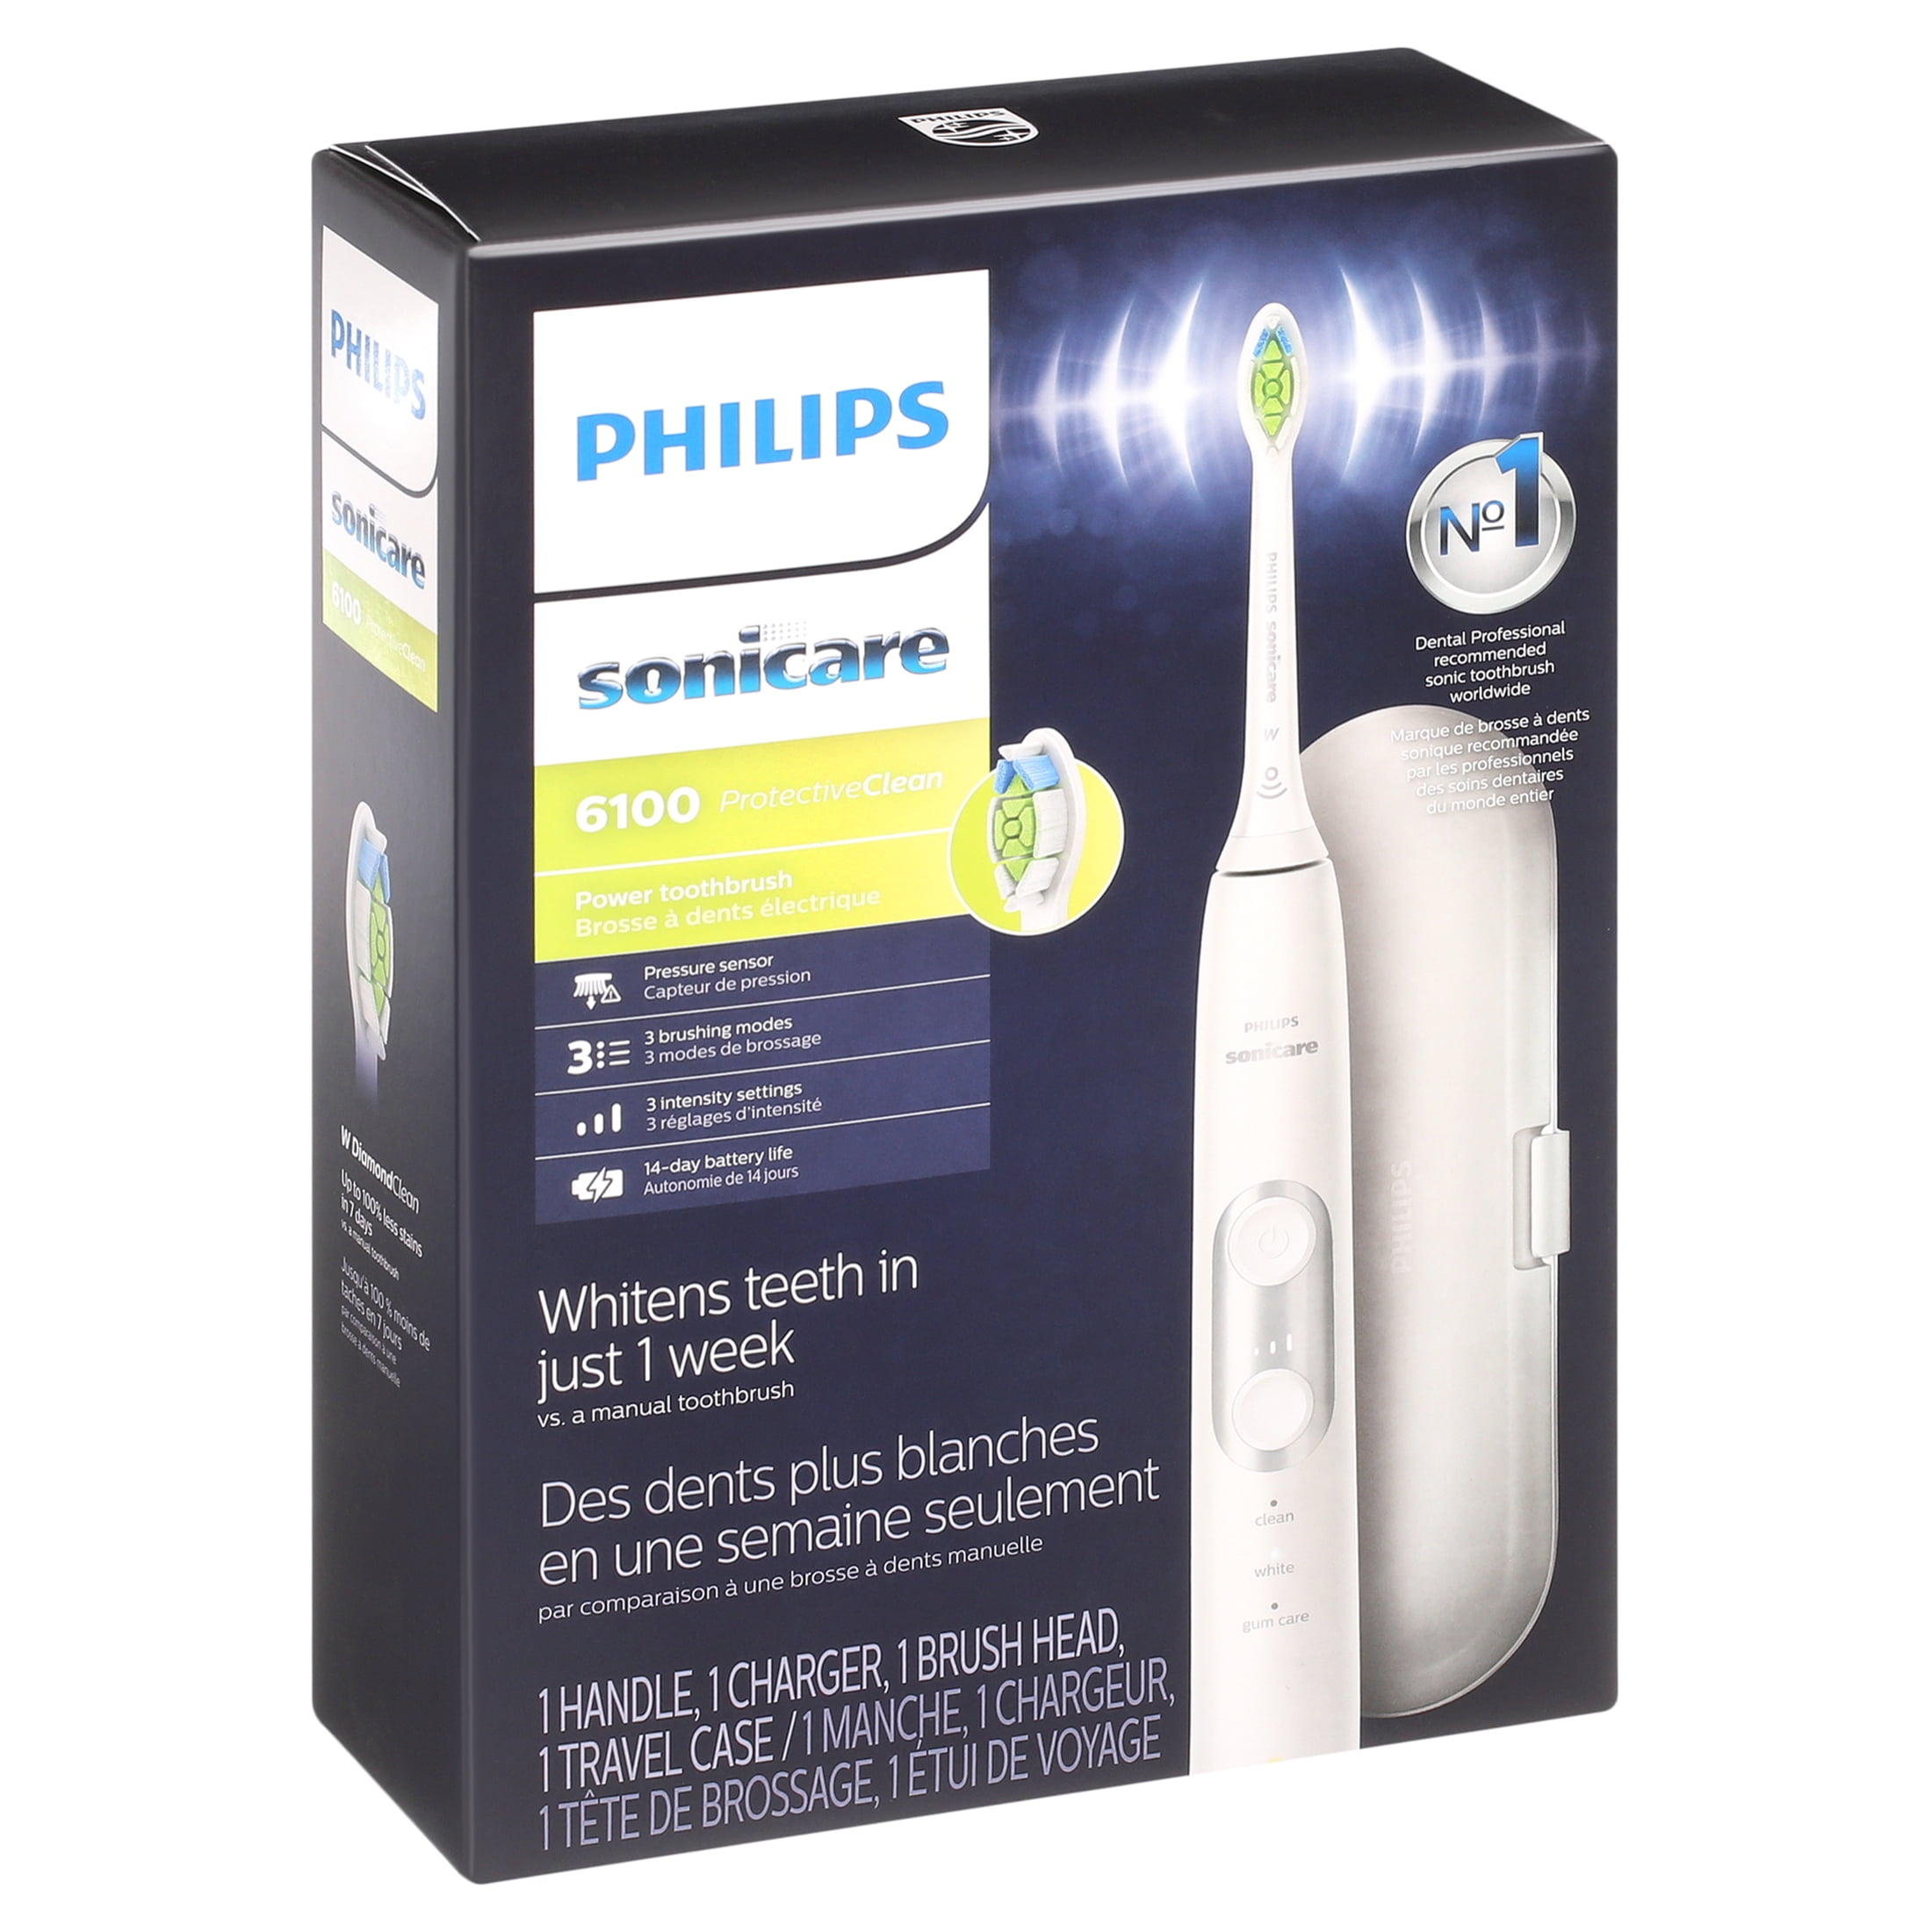 zand schraper gedragen Philips Sonicare ProtectiveClean 6100 Whitening Rechargeable Electric  Toothbrush with Pressure Sensor, White Hx6877/21 - Walmart.com